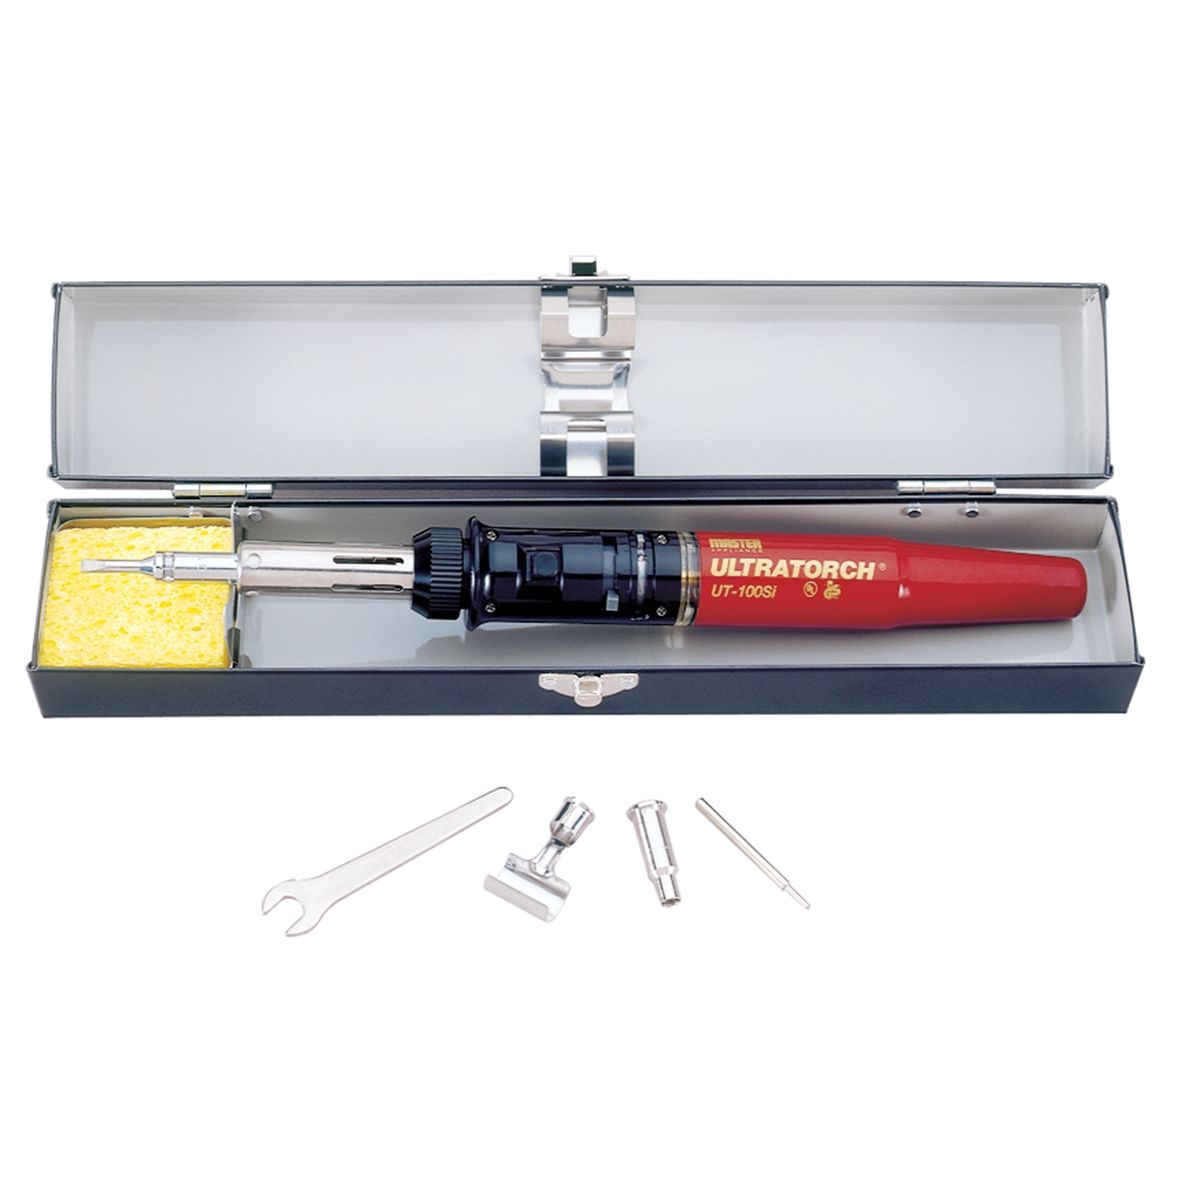 ULTRATORCH Cordless Soldering Tool